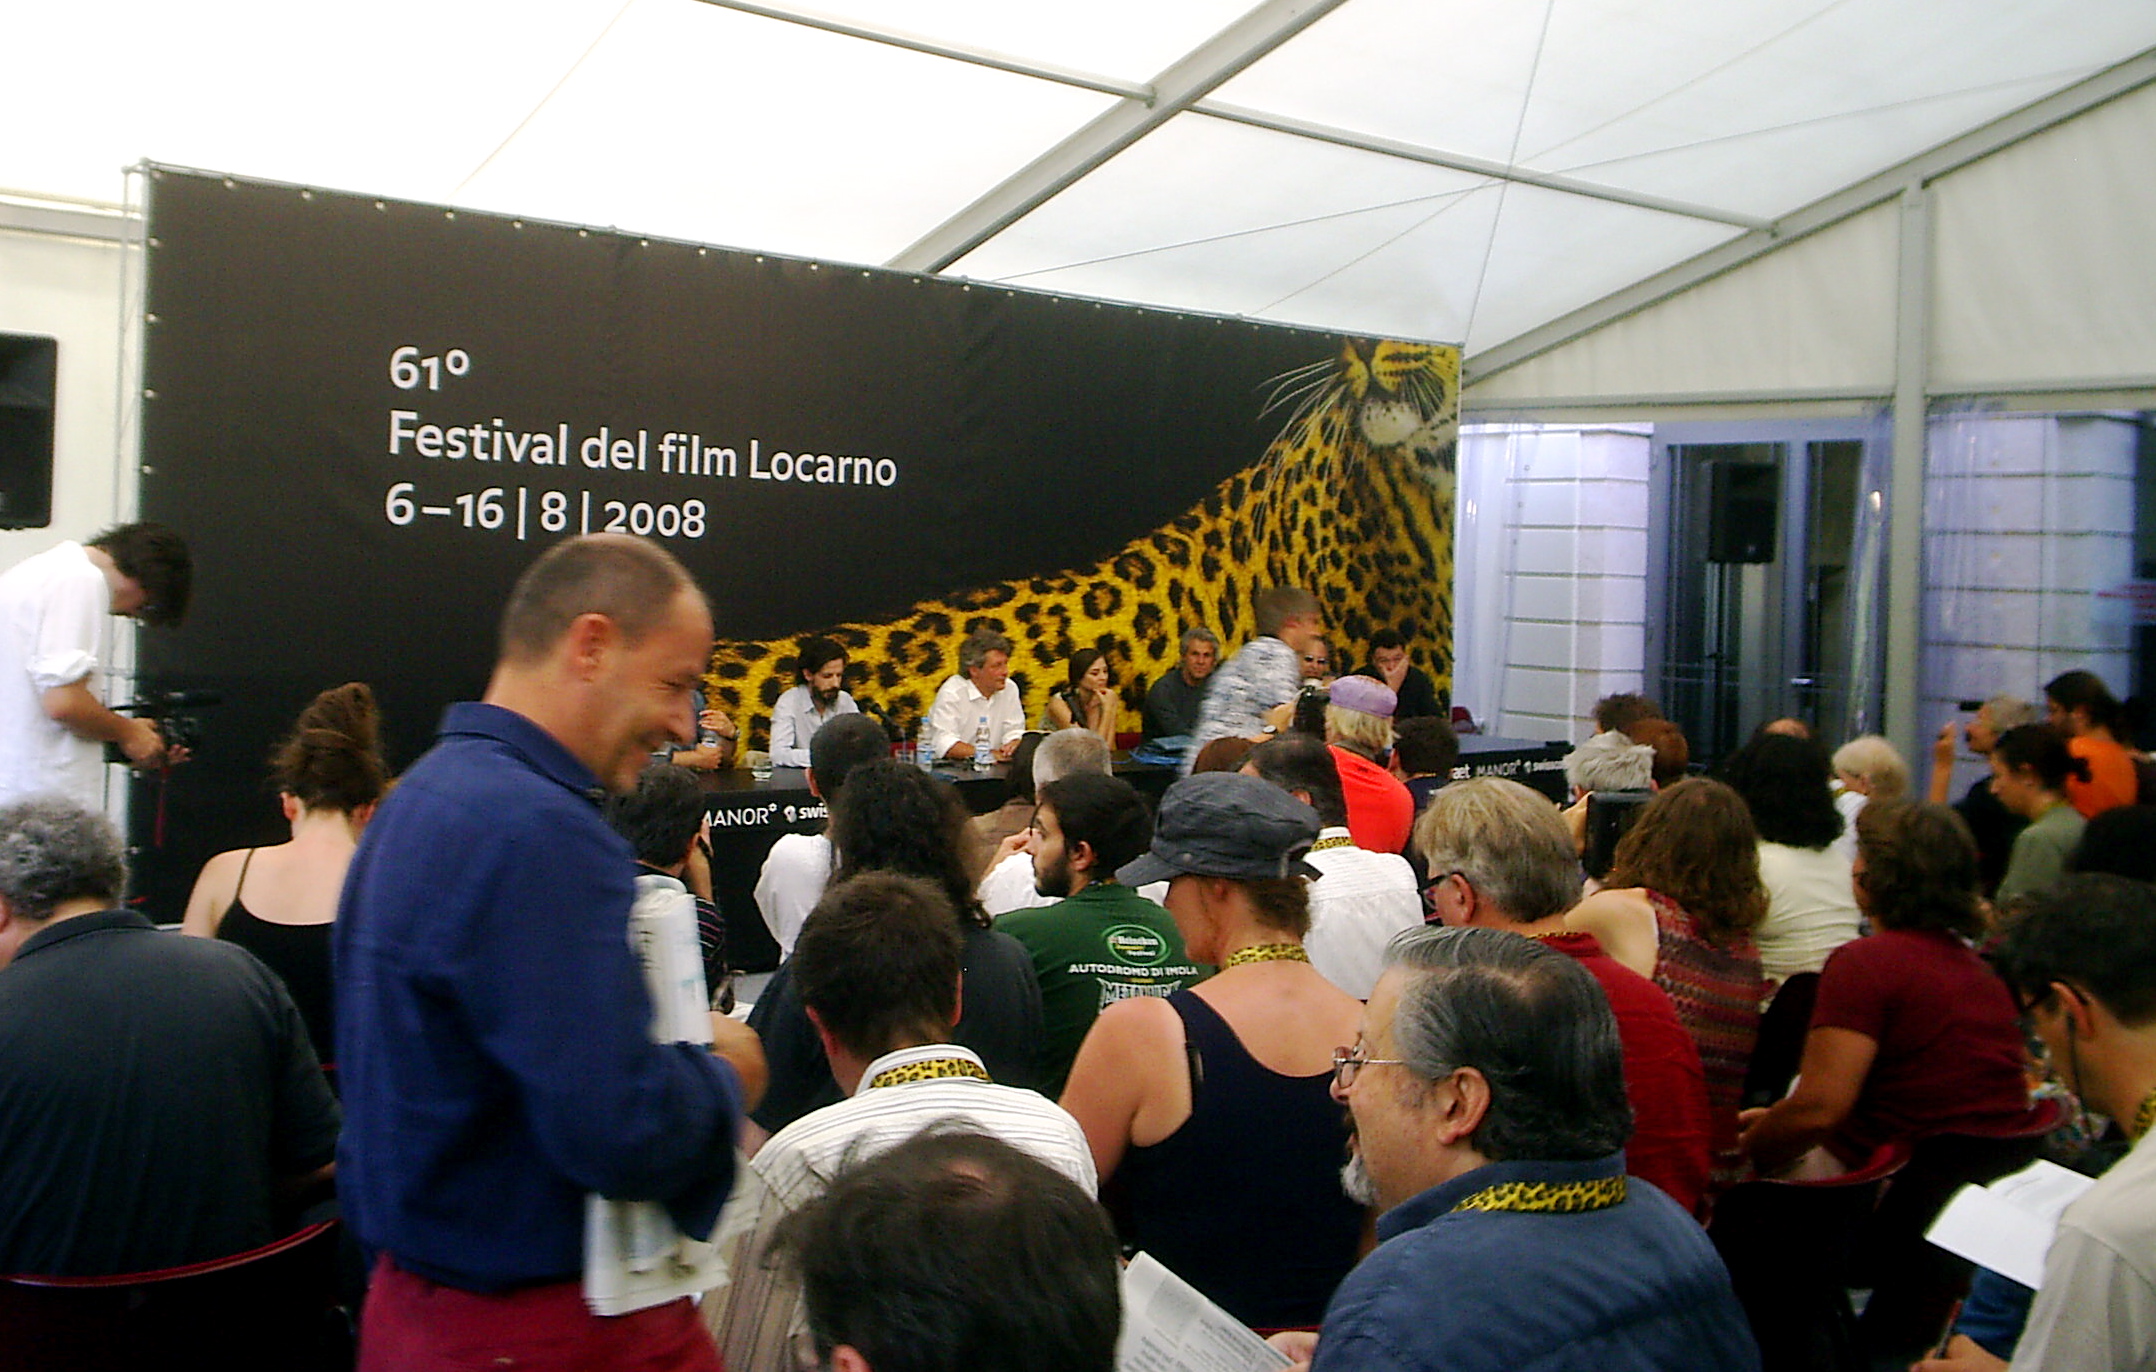 On the panel at the Locarno Film Festival